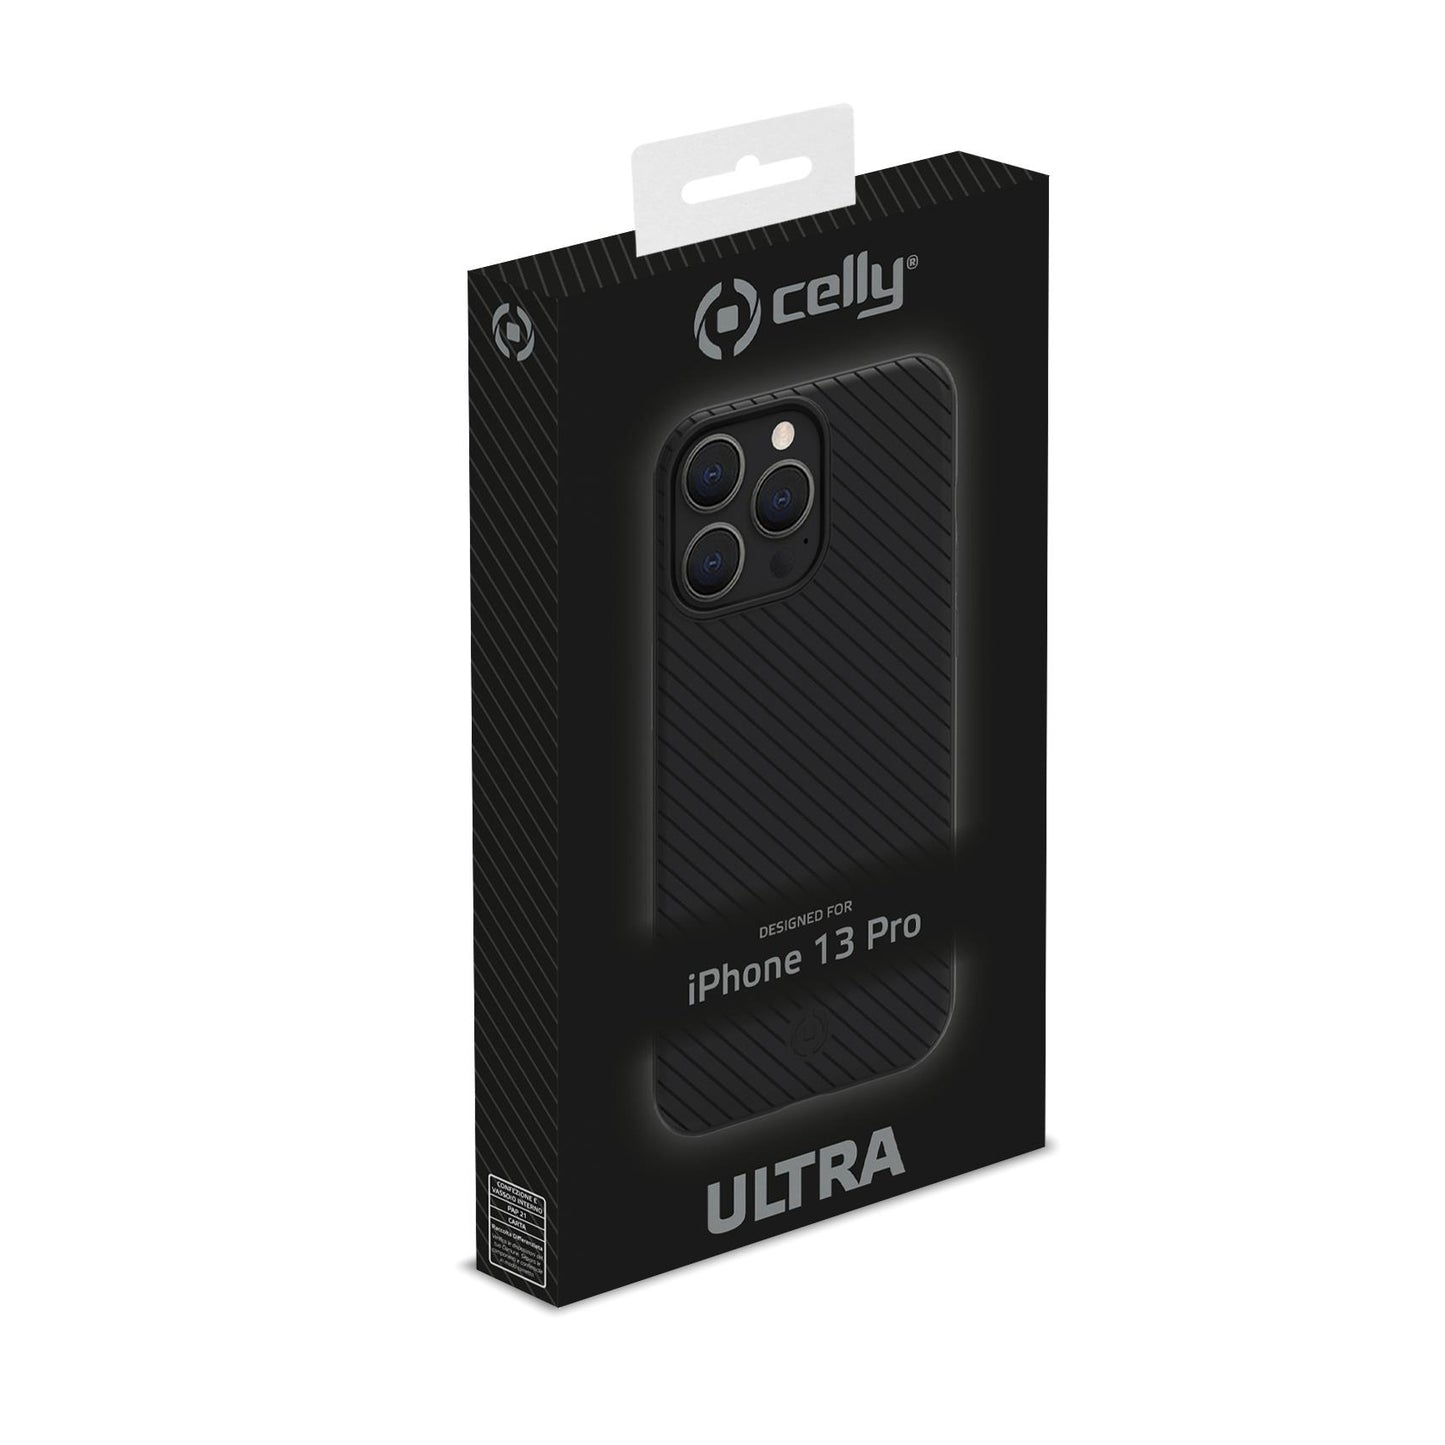 ULTRA COVER BACK IPHONE 13 PRO BK Celly